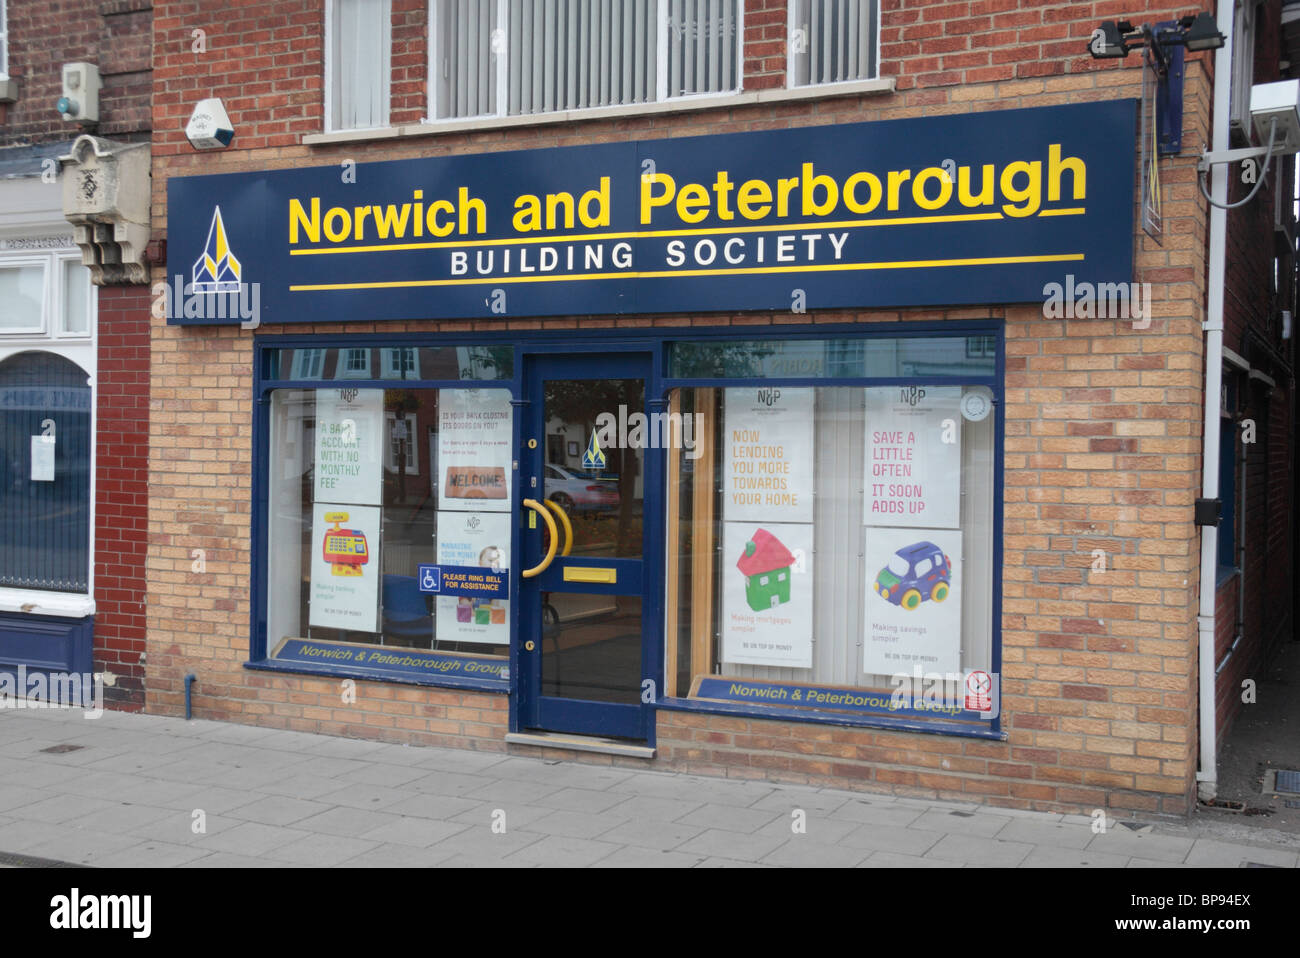 The logo and shop front of a branch of the Norwich and Peterborough Building Society, in St Ives, Cambridgeshire, UK. Stock Photo